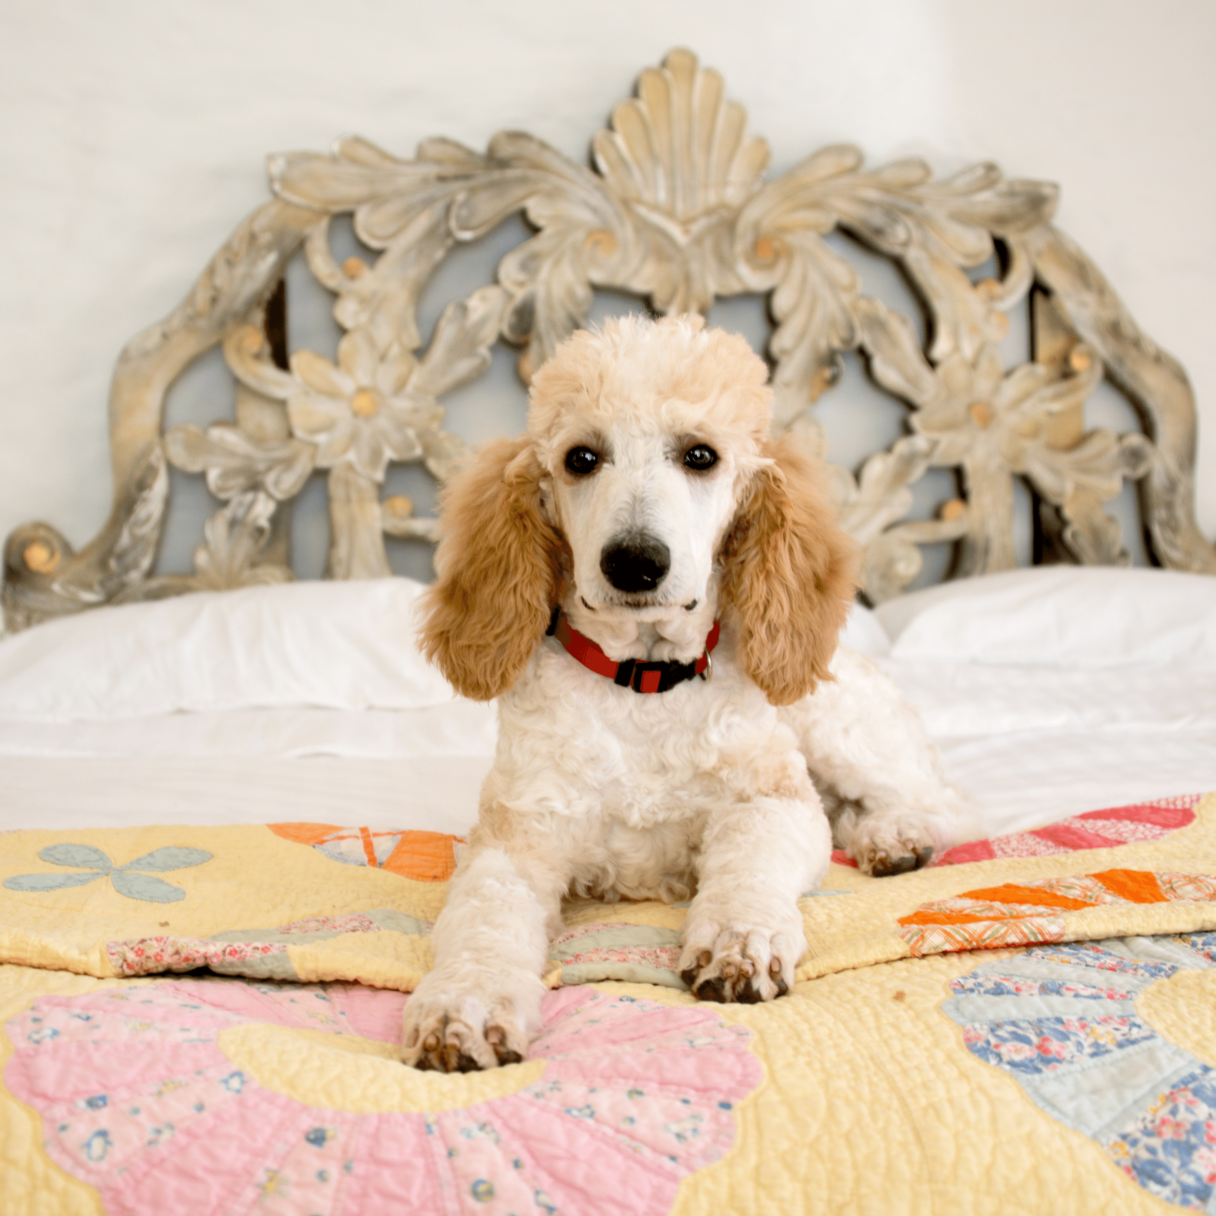 Dog on double bed with colourful blanket, posing to the camera